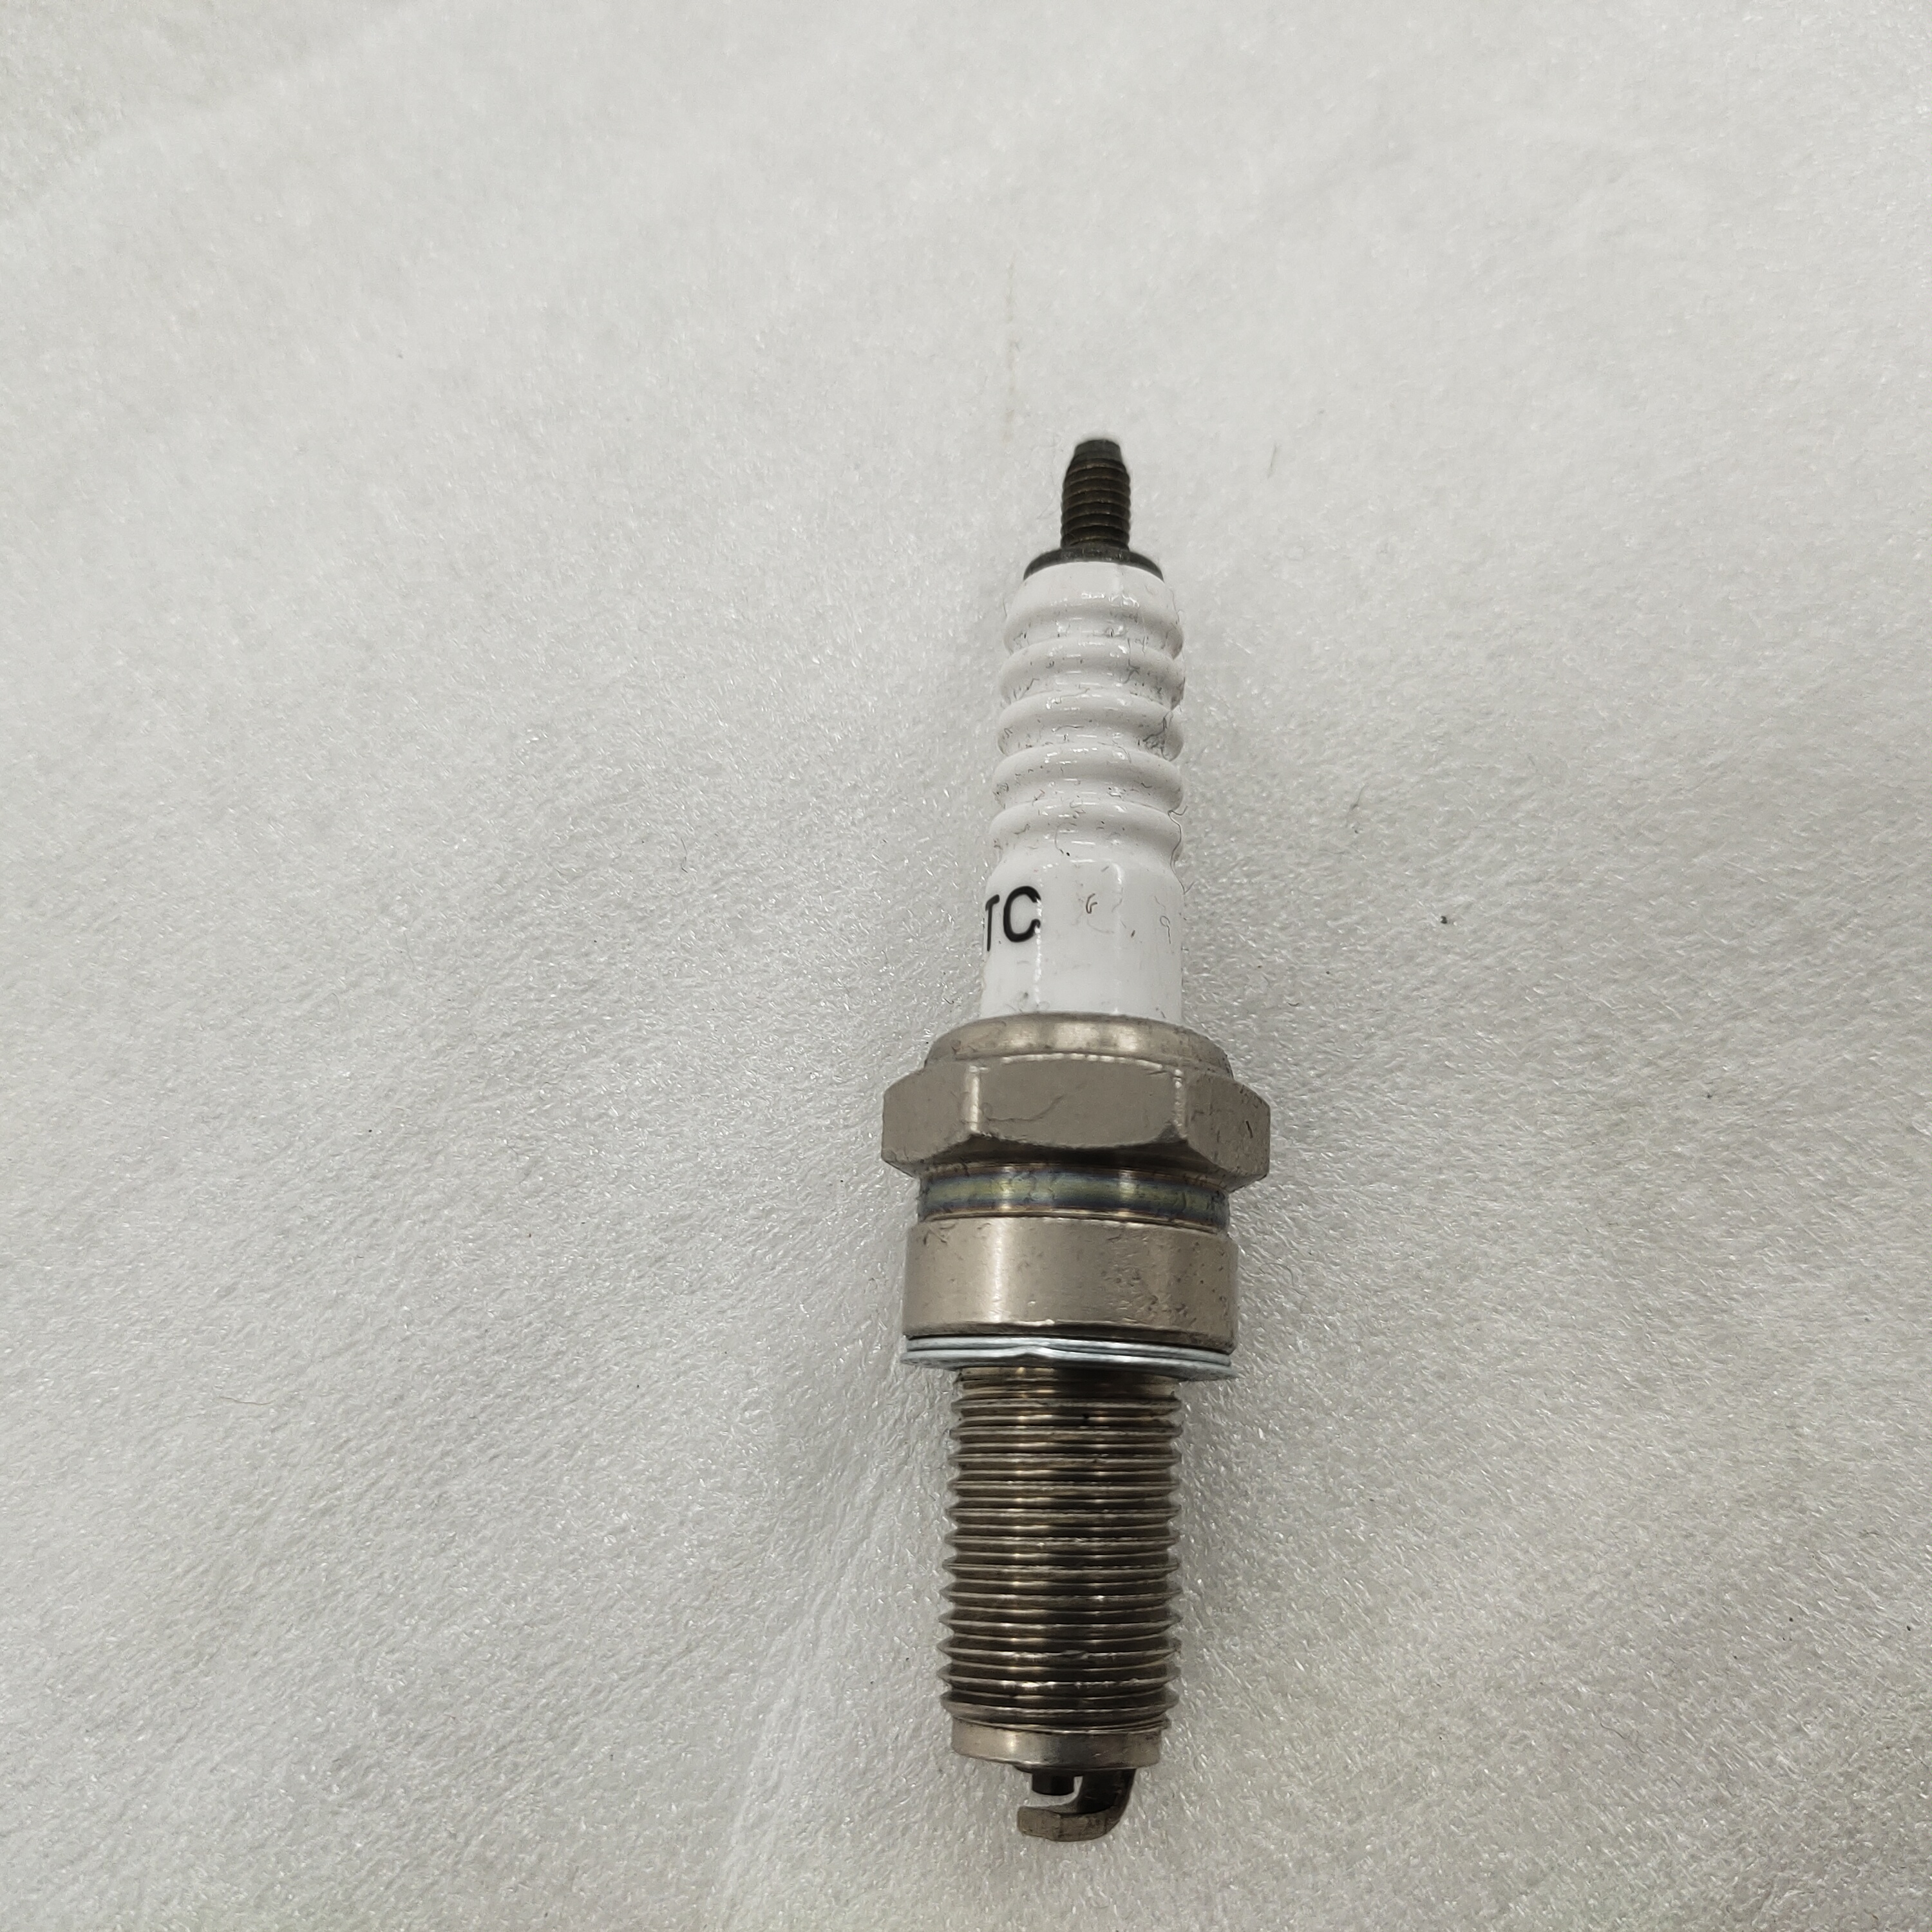 tricycle engine spare parts Spark plug lower emissions for lifan engine 250cc water cooled engine  spark plug